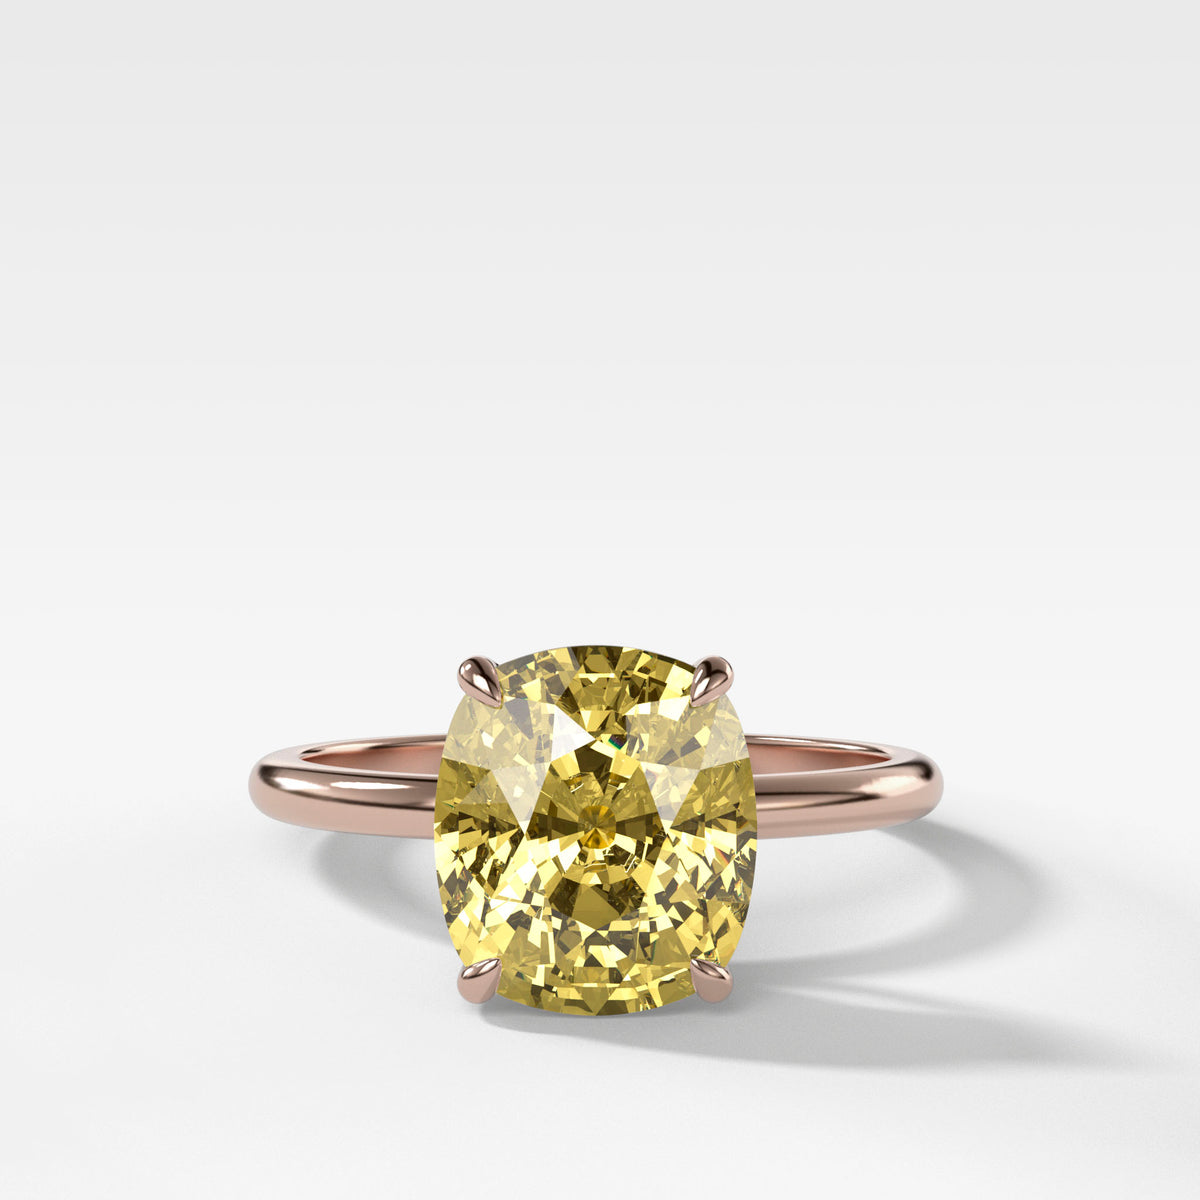 Thin + Simple Solitaire Engagement Ring With Canary Yellow Elongated Cushion Cut Diamond